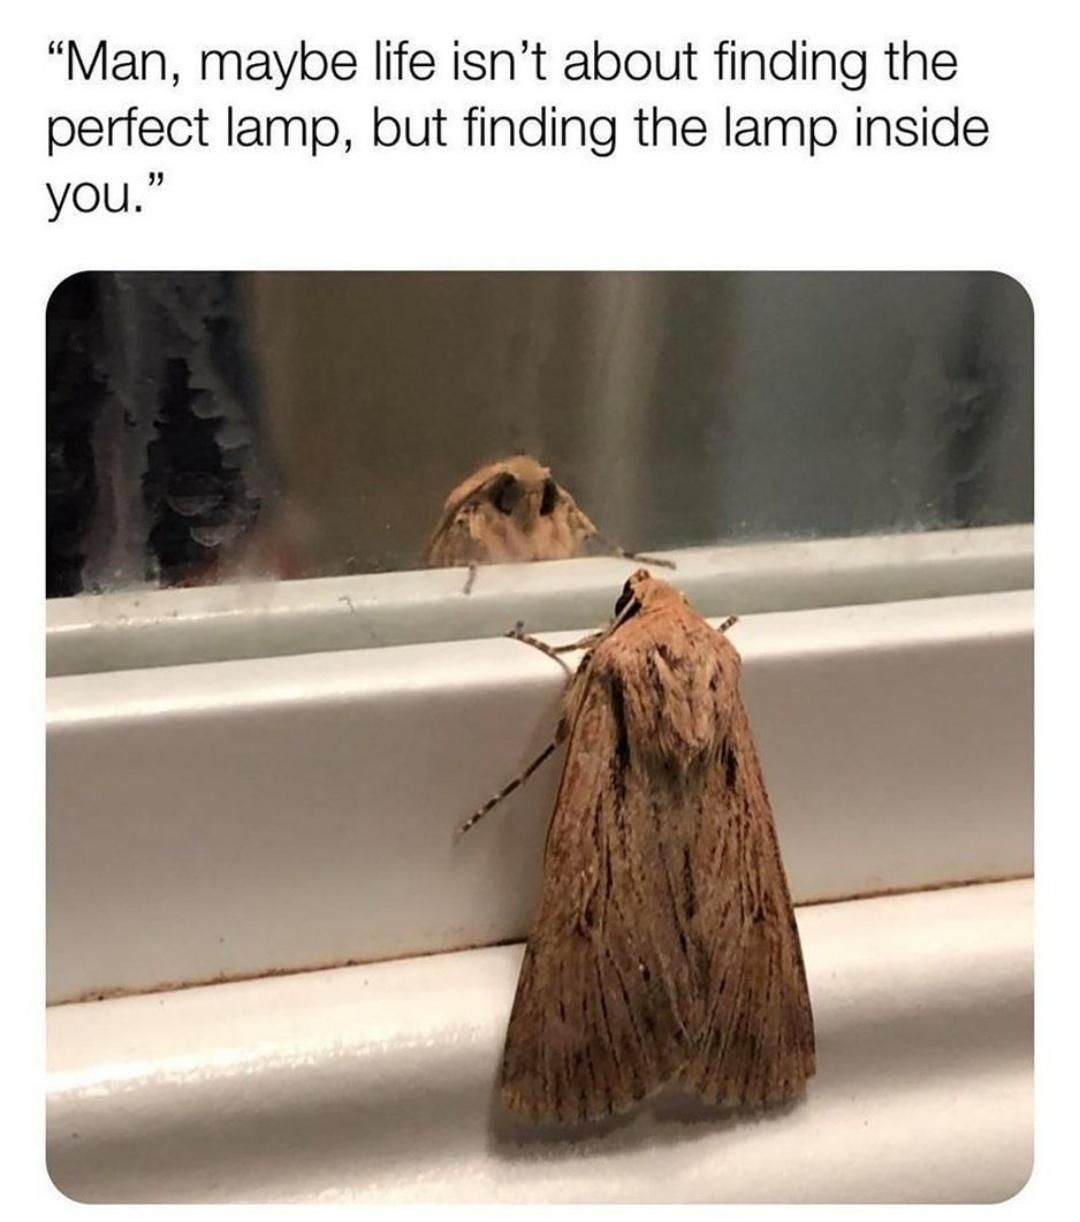 man maybe life isn't about finding the perfect lamp, but finding the lamp inside you, existential moth